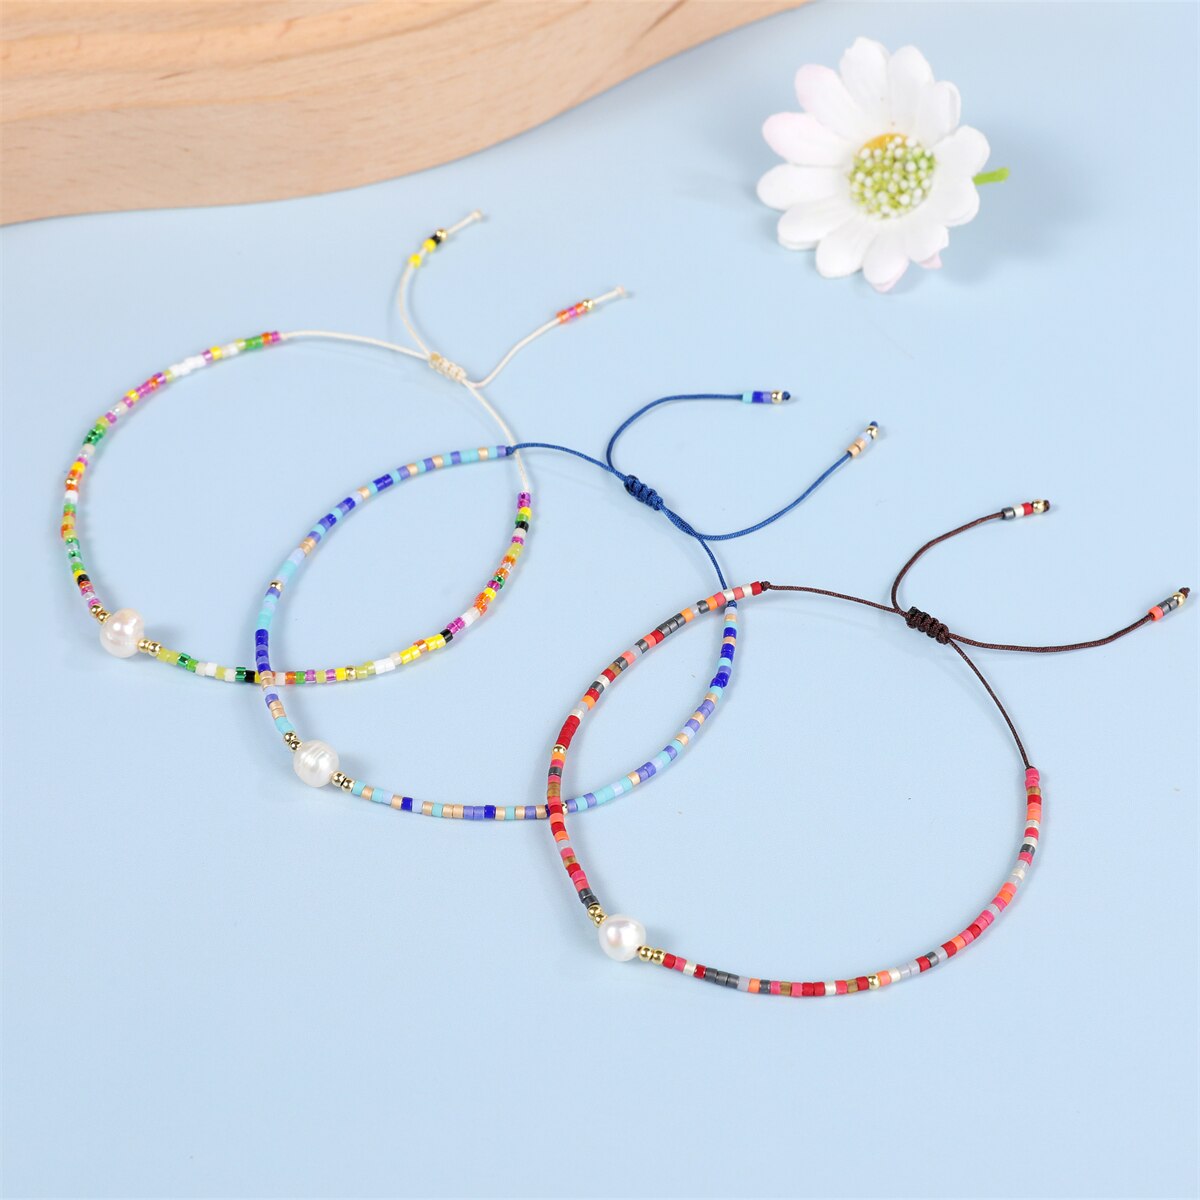 Handmade Seed Beads Charms Pearl Bracelets Adjustable Braided Bracelet Anklet Women Girl Wristband Cuff Jewelry